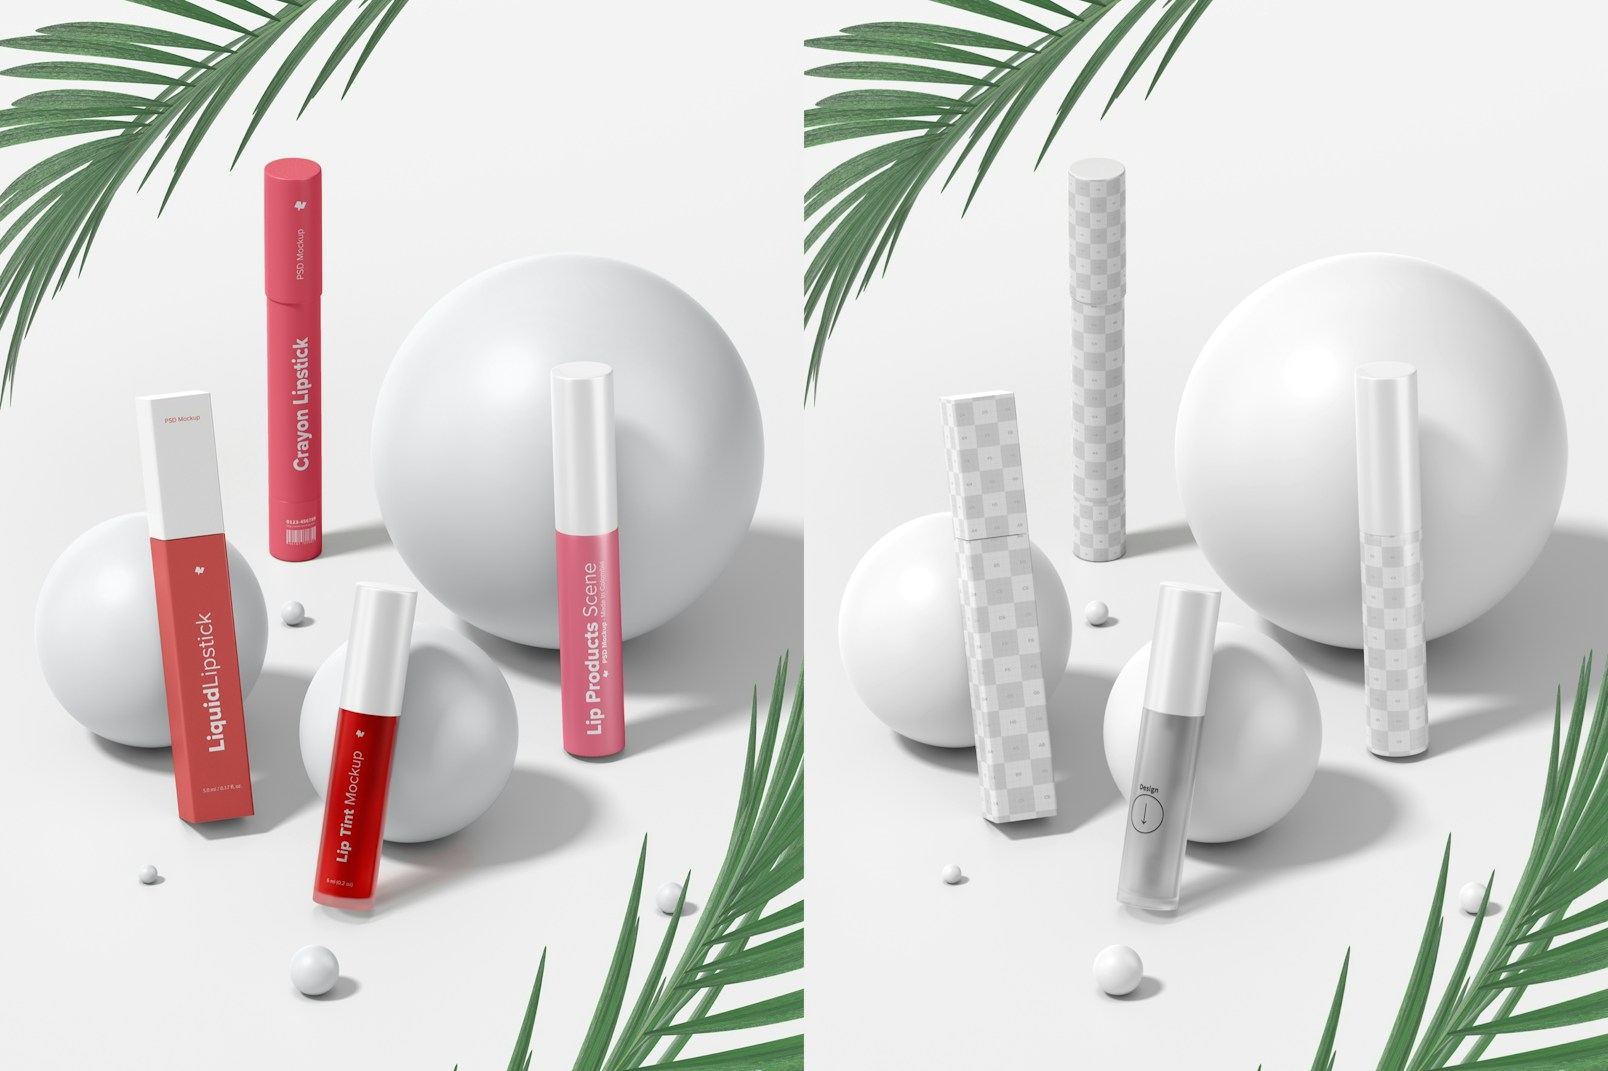 Lip Products Scene Mockup, Perspective View